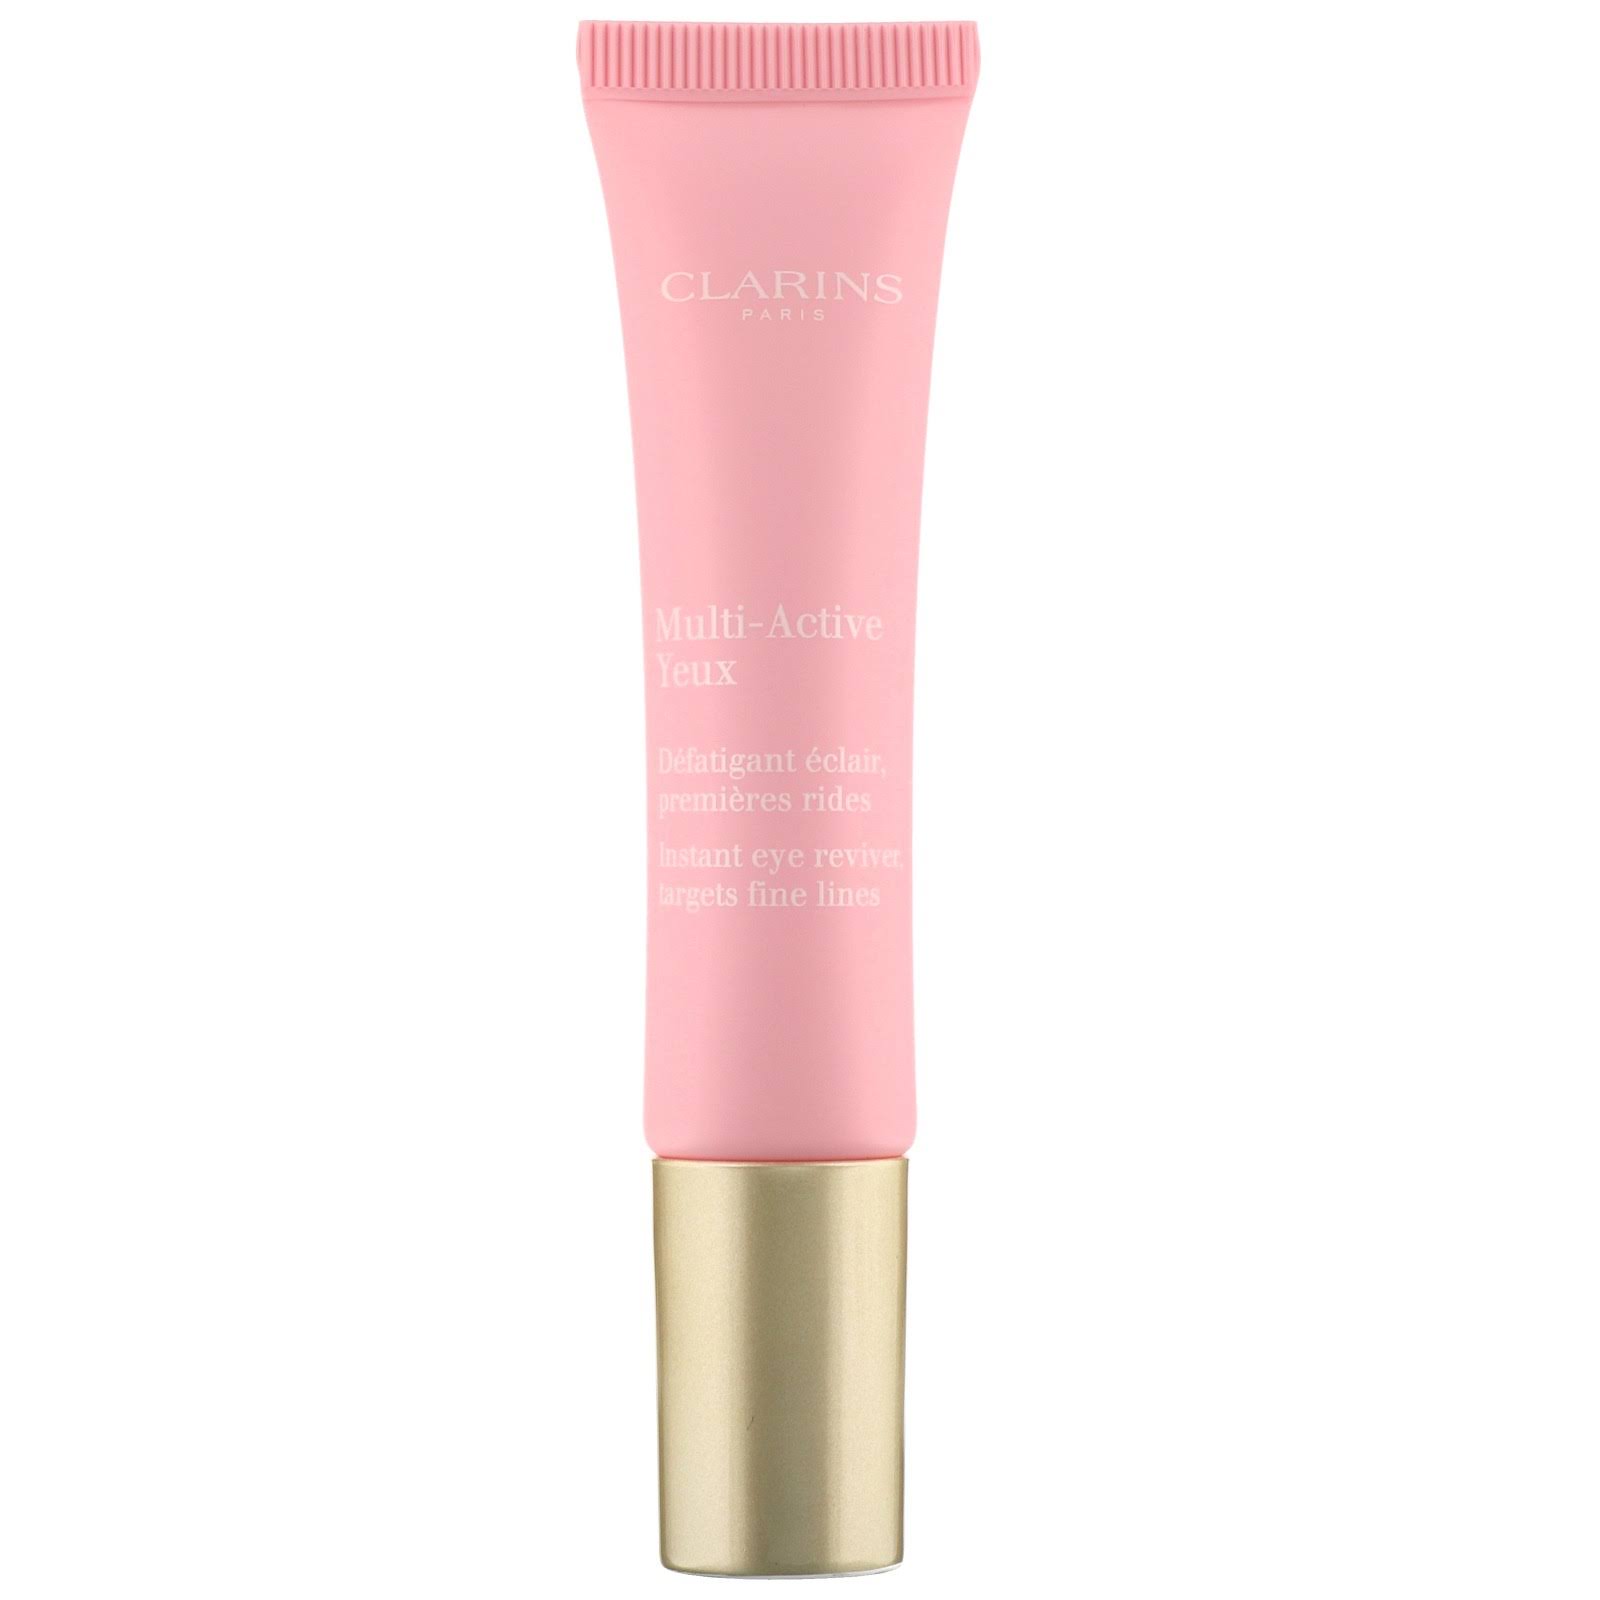 Clarins Multi-Active Yeux 15.0 mL